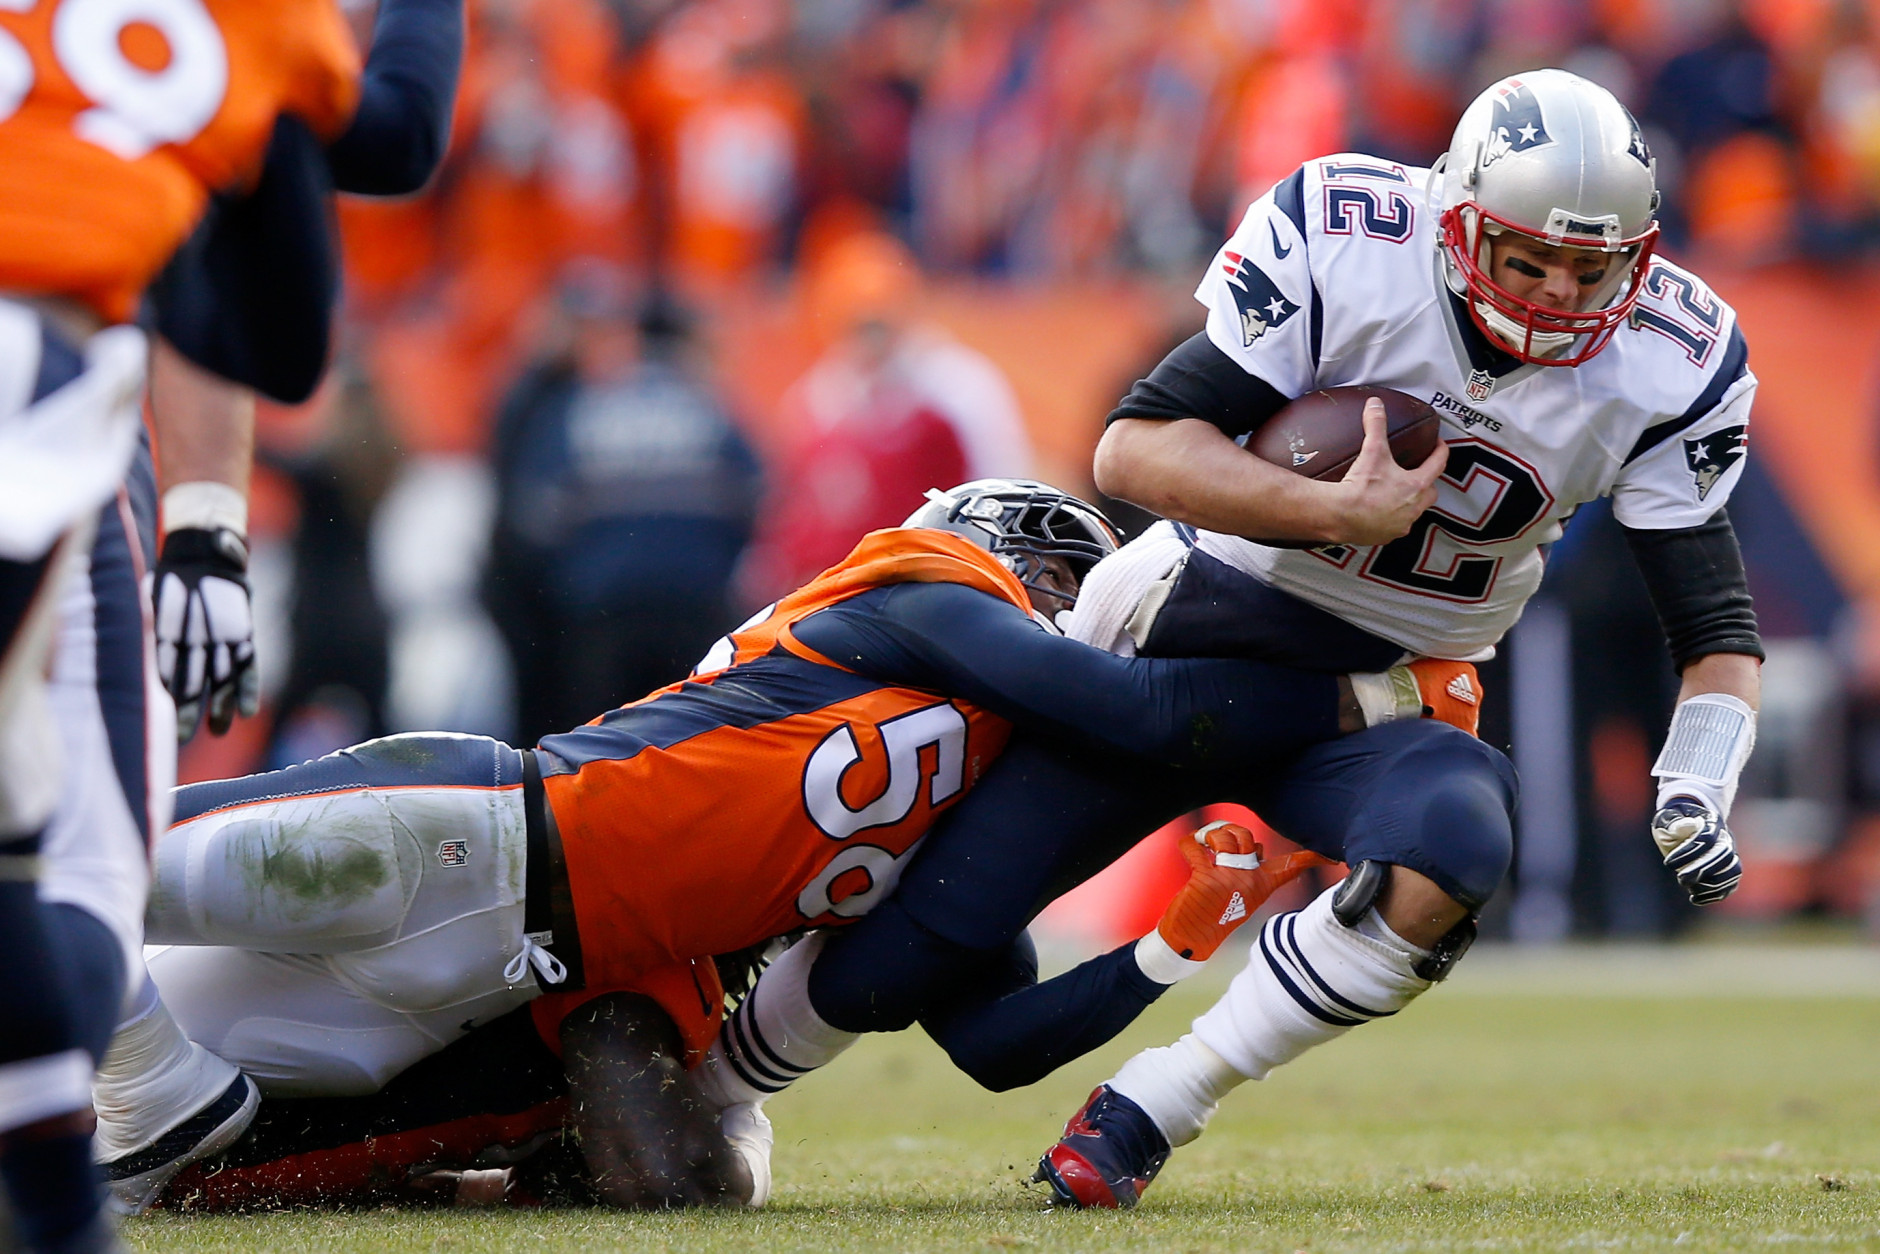 DENVER, CO - JANUARY 24:  Tom Brady #12 of the New England Patriots is sacked by  Von Miller #58 of the Denver Broncos in the second quarter in the AFC Championship game at Sports Authority Field at Mile High on January 24, 2016 in Denver, Colorado.  (Photo by Ezra Shaw/Getty Images)